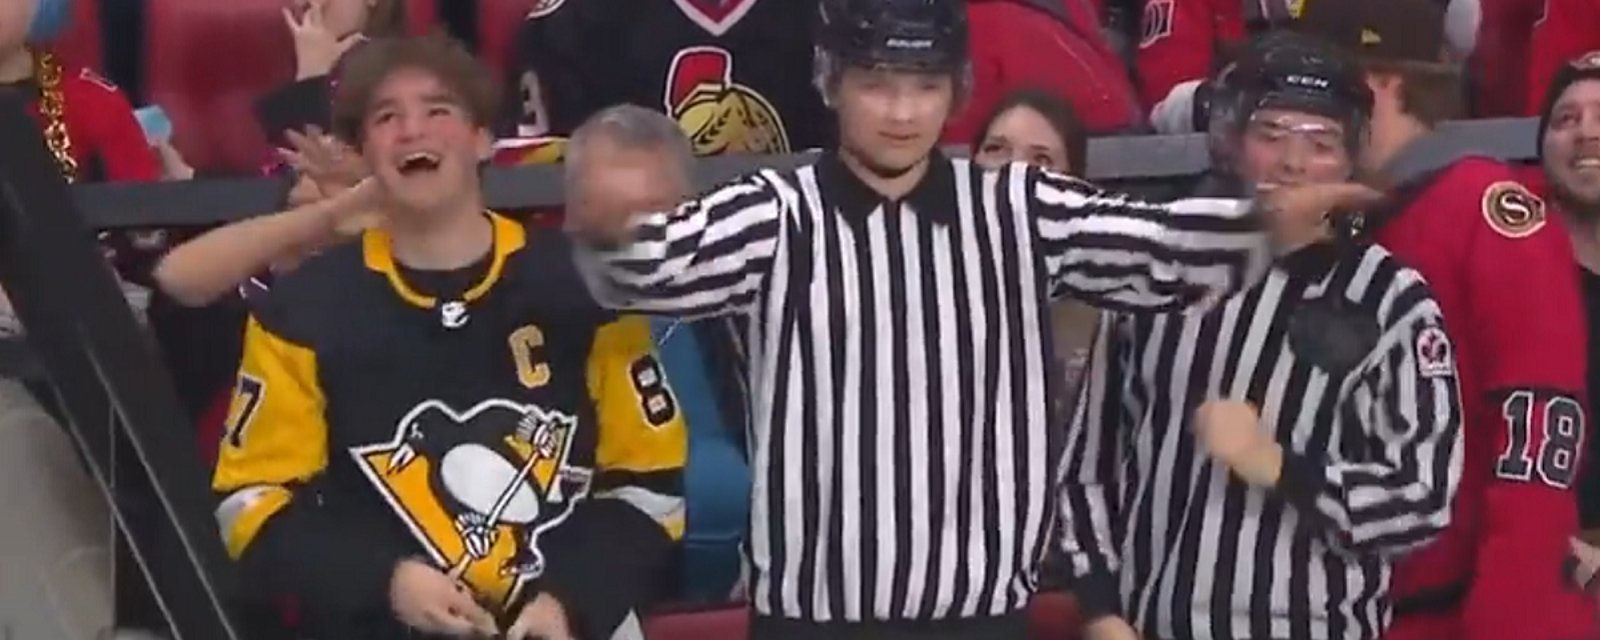 Referees caught accepting bribes during an NHL game.